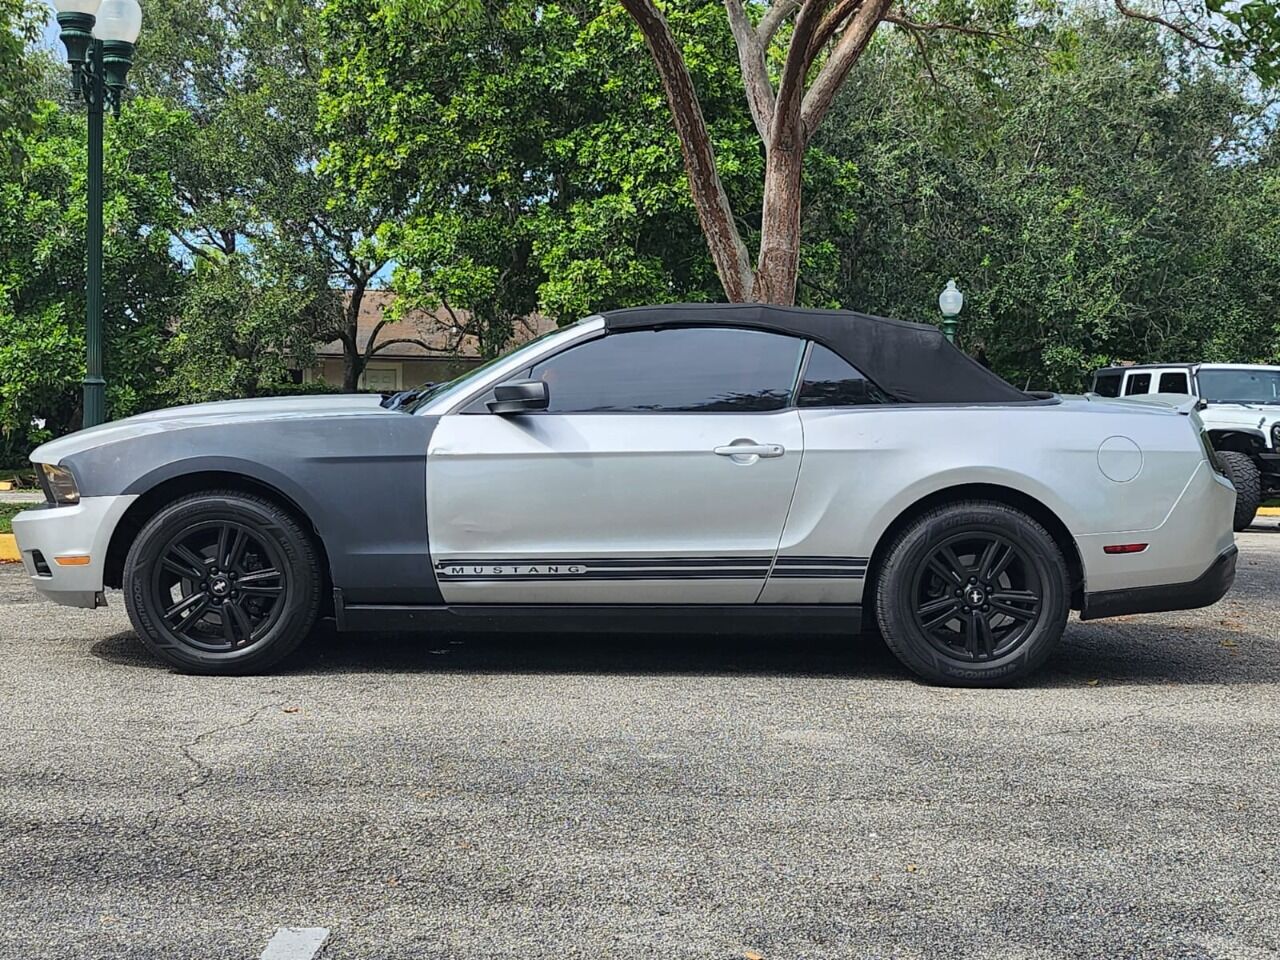 2010 FORD Mustang Convertible - $9,995